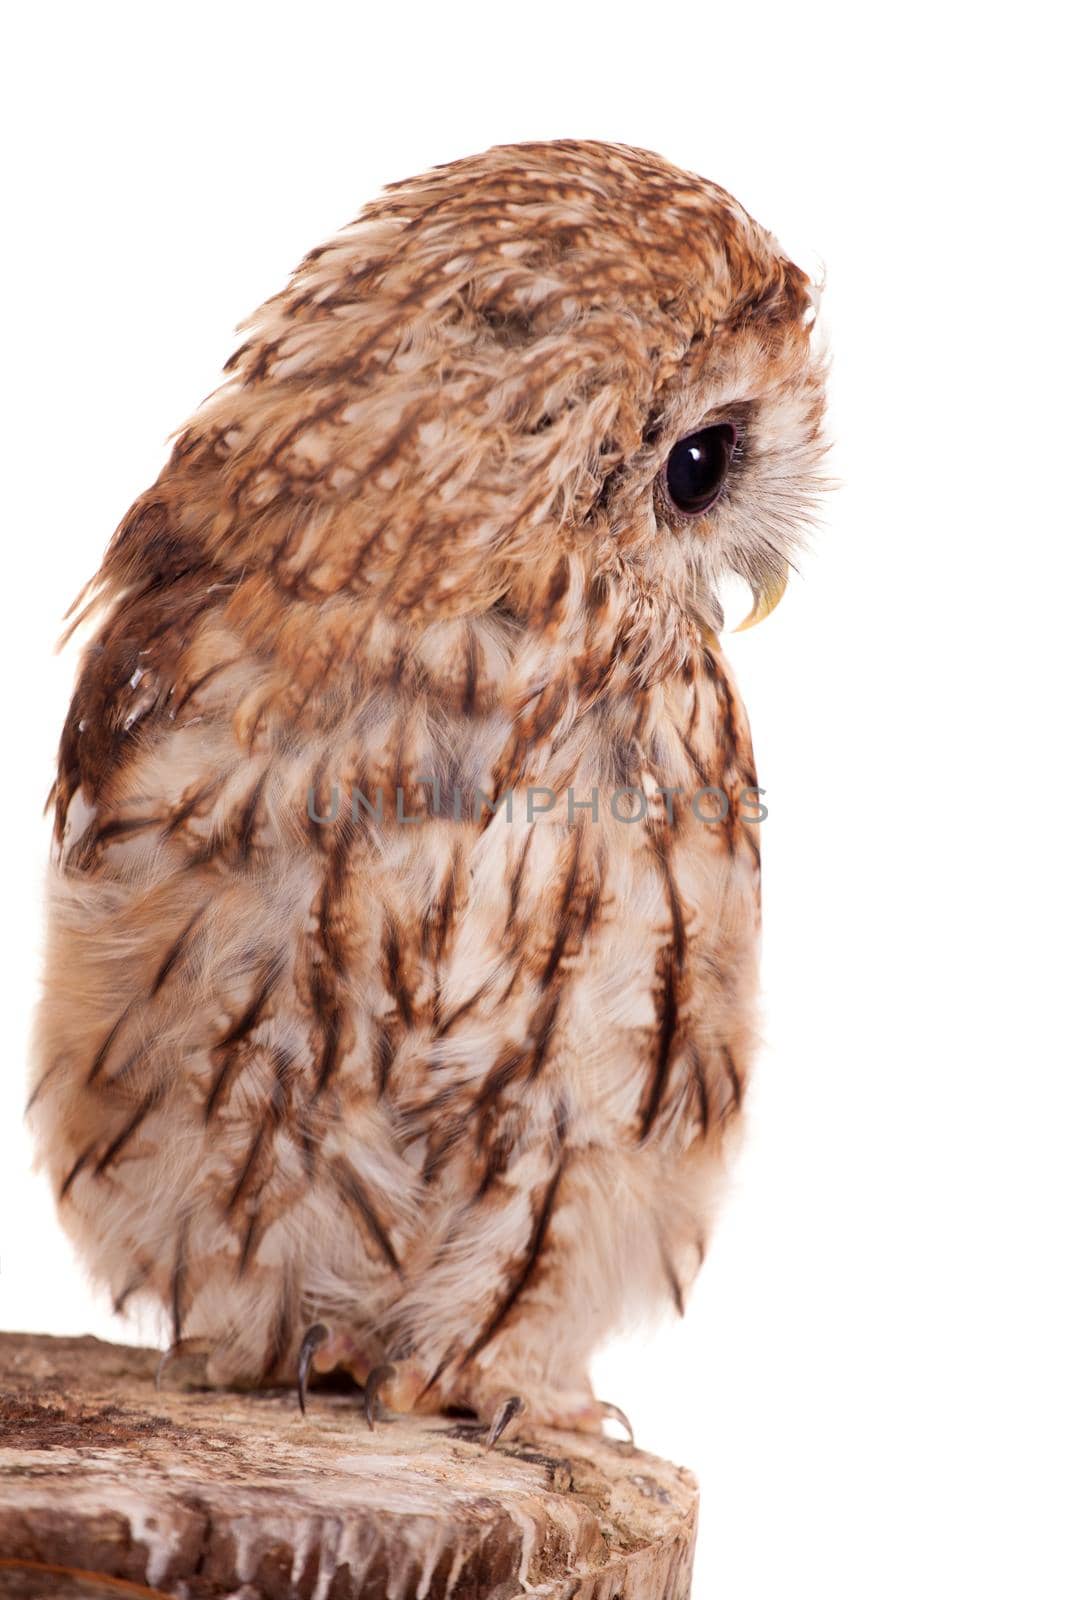 Tawny or Brown Owl, Strix aluco, isolated on the white background